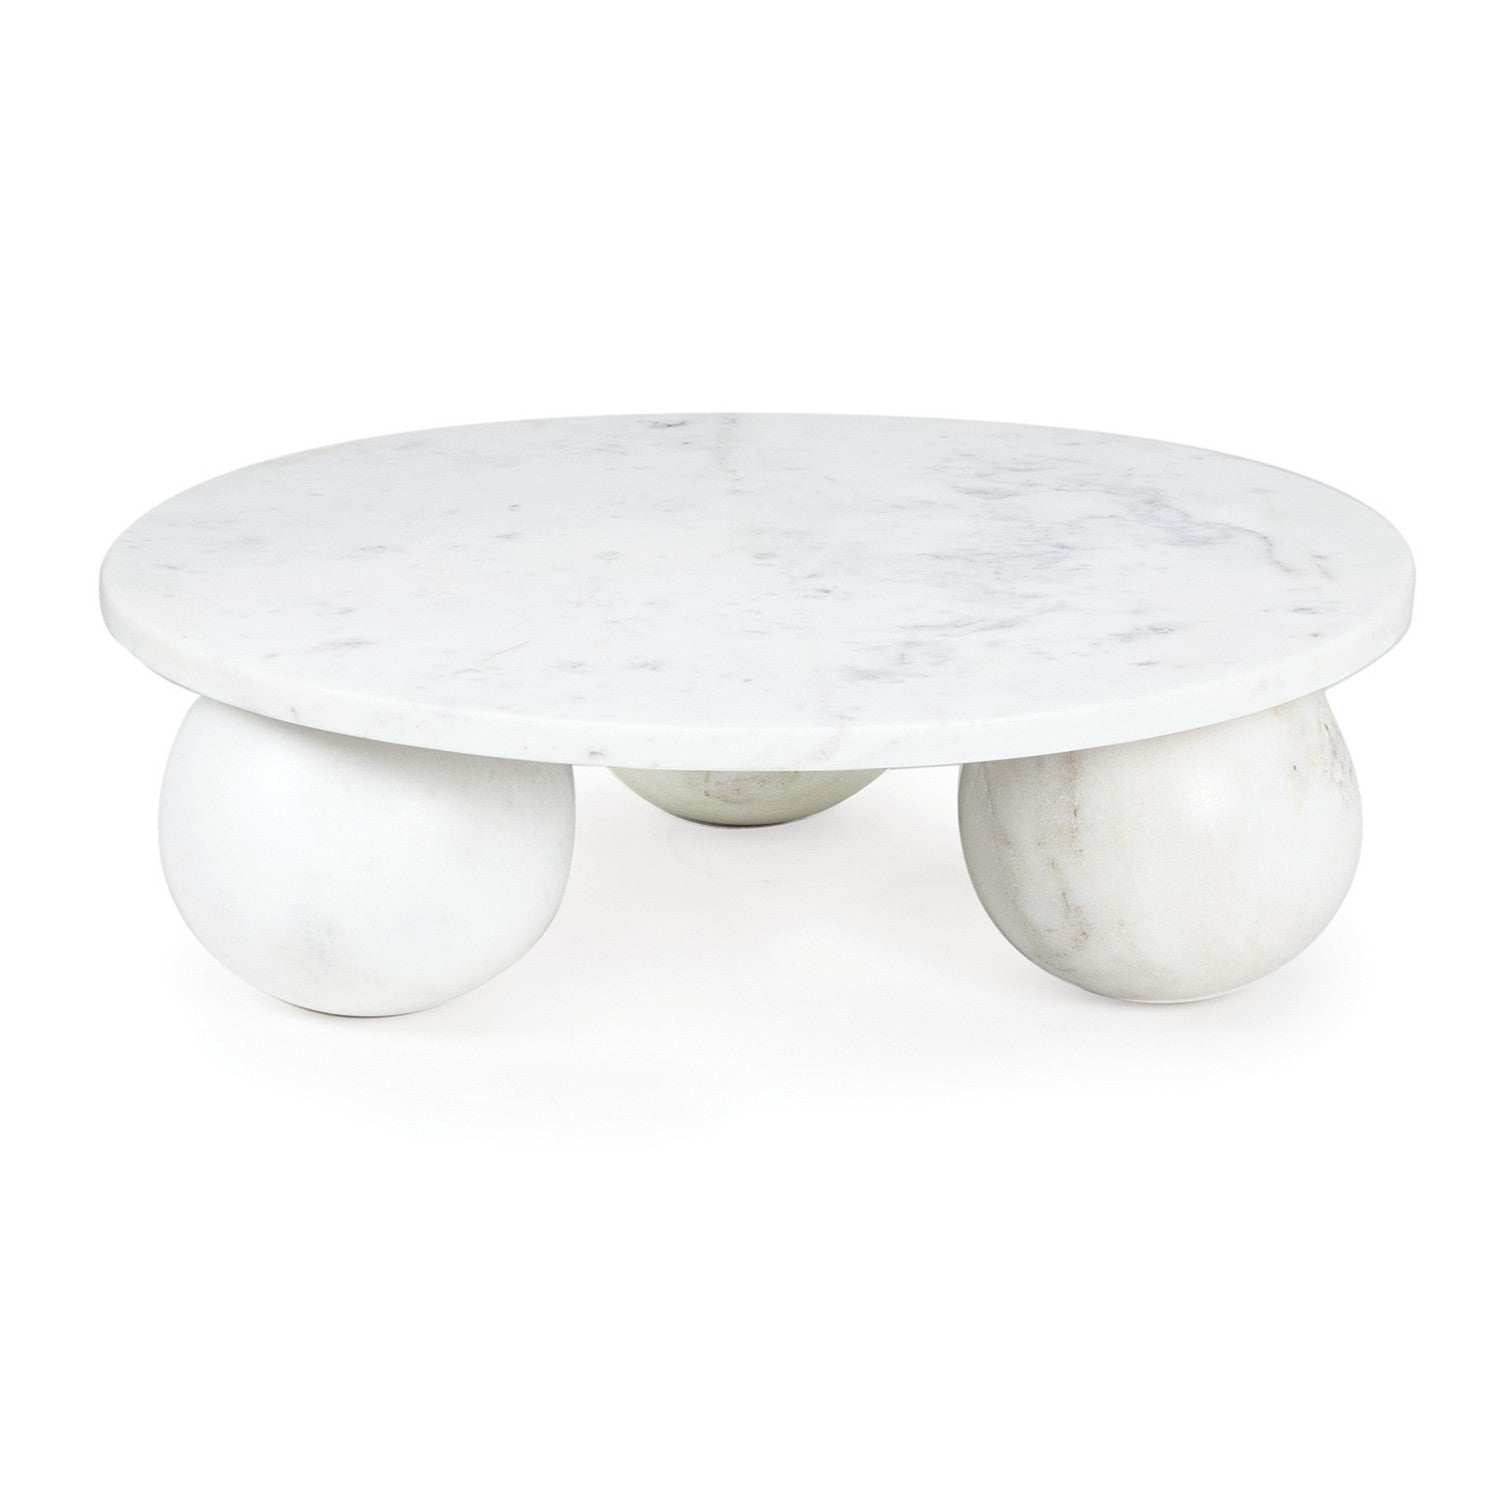 Regina Andrew - 20-1535WT - Marble Plate - Marlow - White